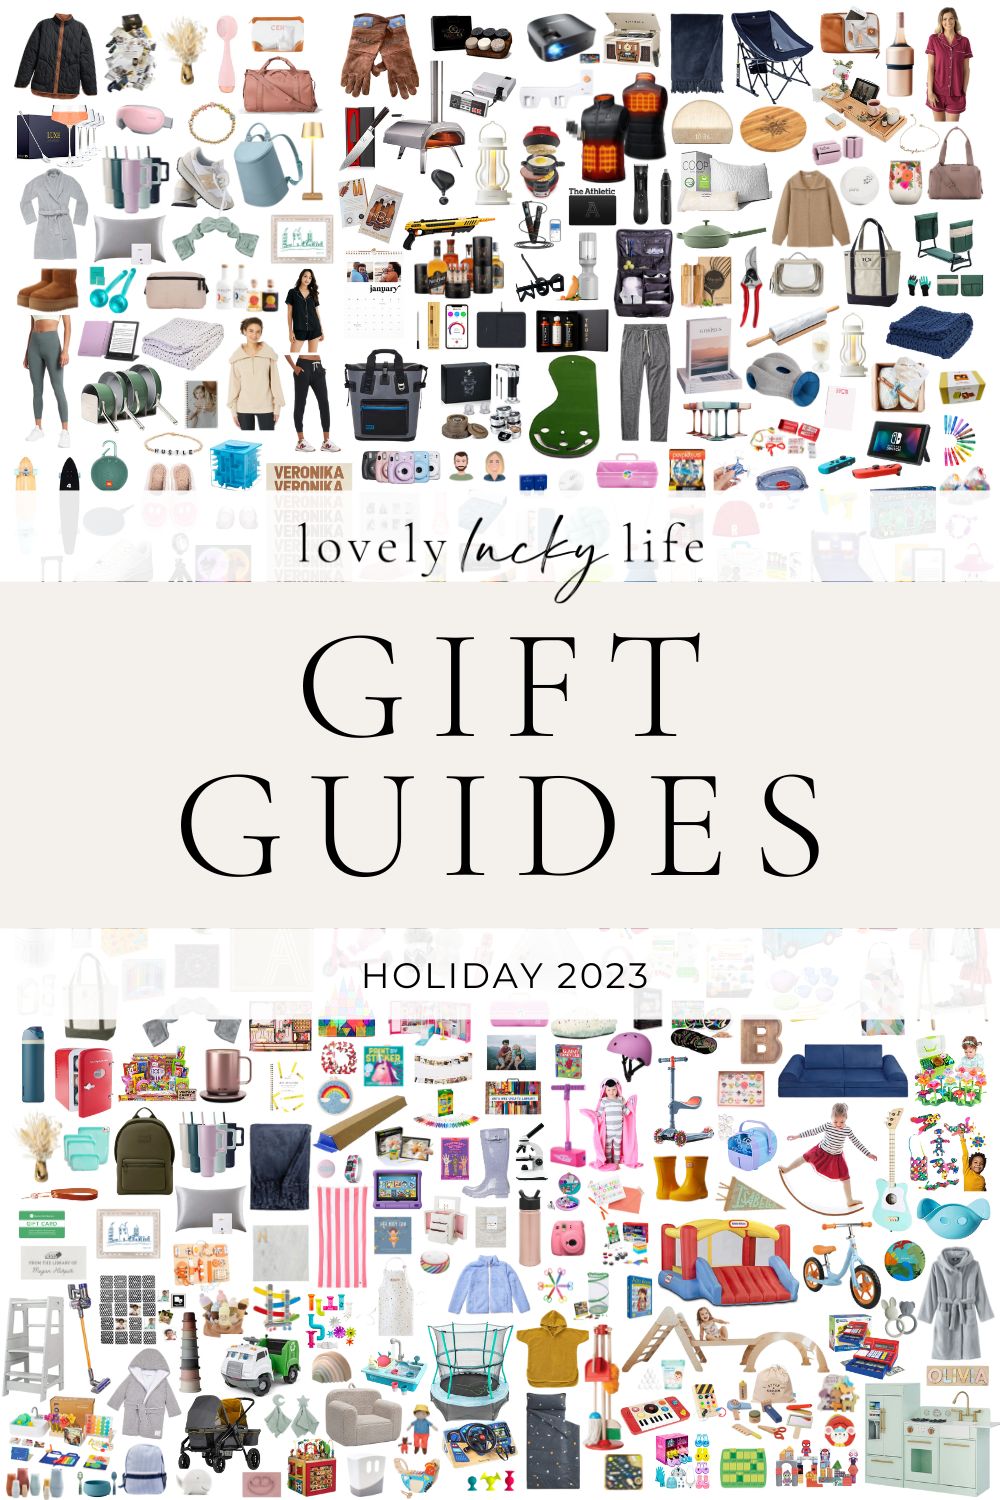 2023 Gift Guides - Lovely Lucky Life